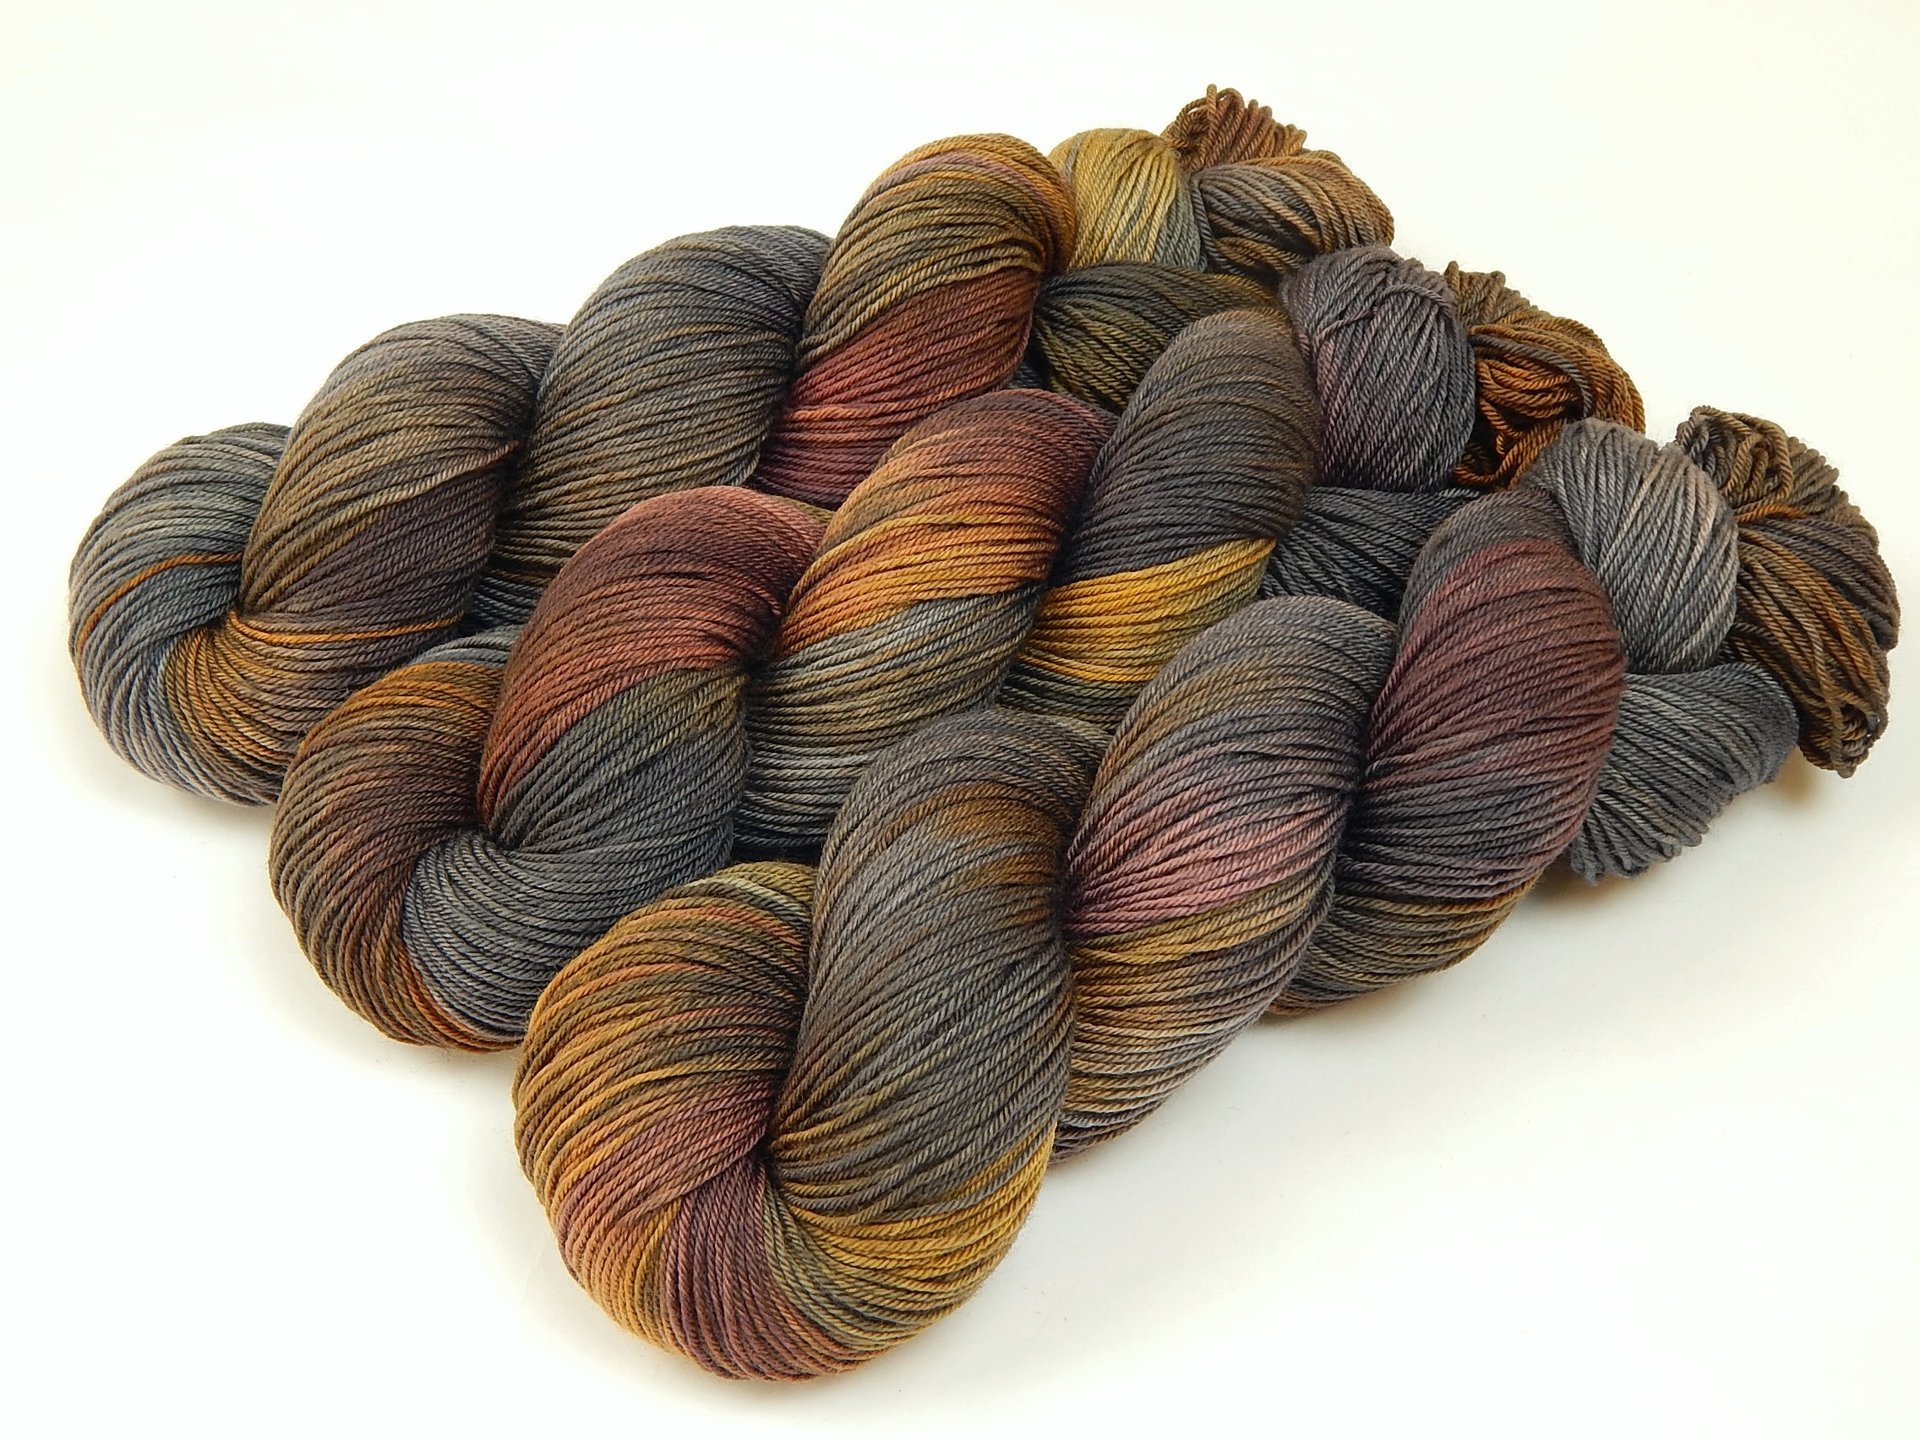 Hand Dyed Yarn, Fingering Sock Weight 4 Ply Superwash Merino Wool - Agate - Indie Dyer Gray Brown Gold Knitting Yarn, Earthy Multicolor